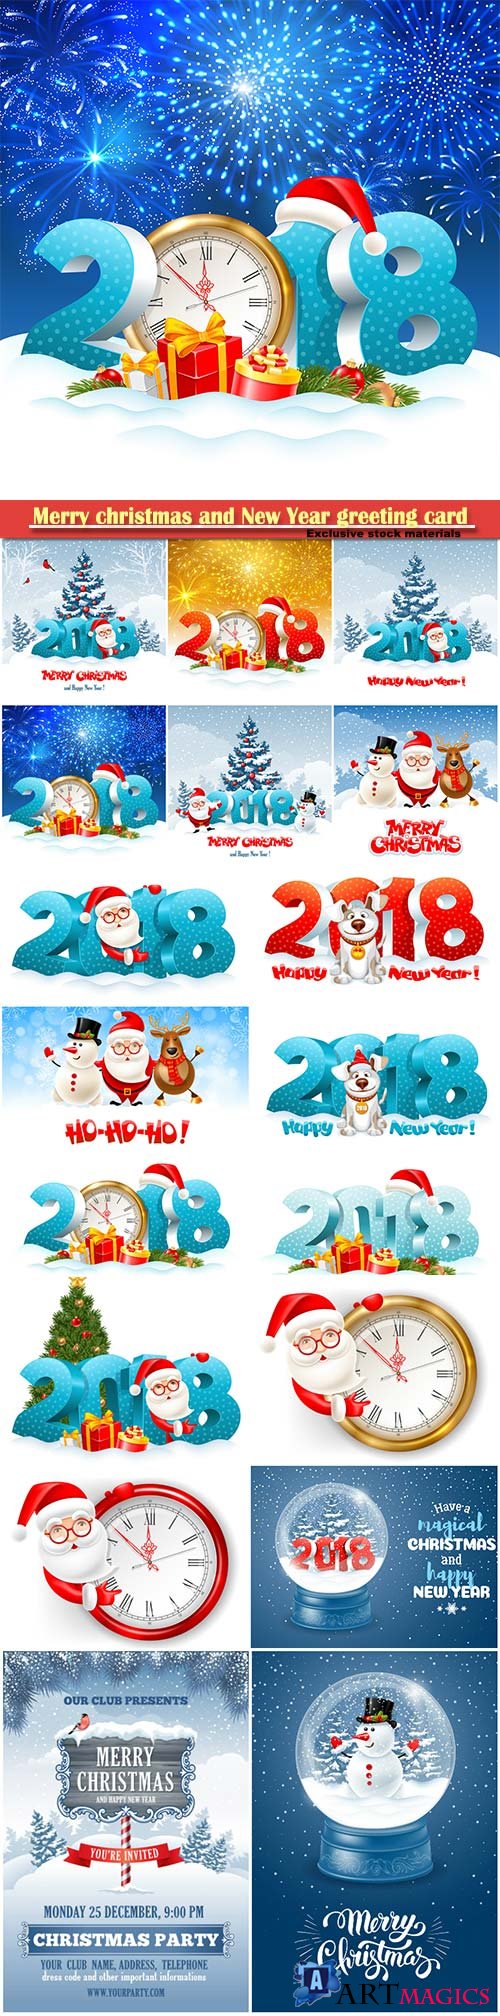 Merry christmas and New Year greeting card vector # 15